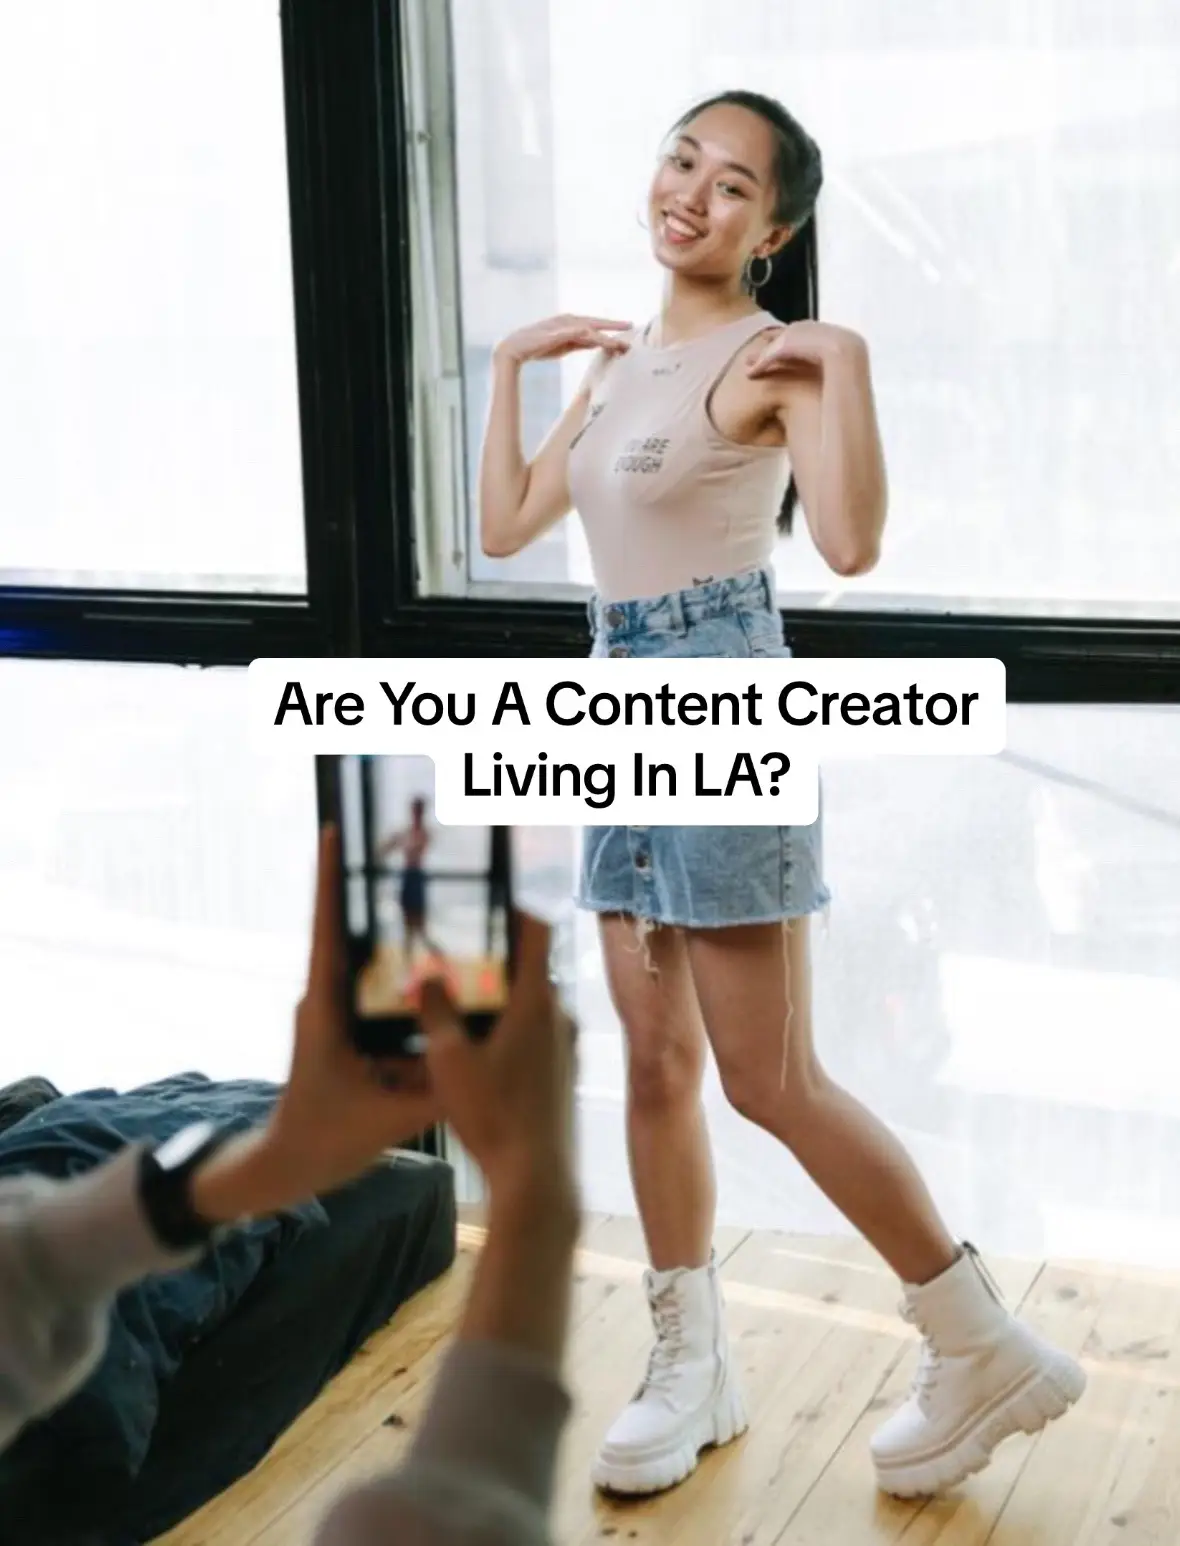 Come learn how to make more sales, grow your account, and so much more! #lacontentcreator #losangelescontentcreator #TikTokShop #becomeacontentcreator #santamonica #contentcreator 